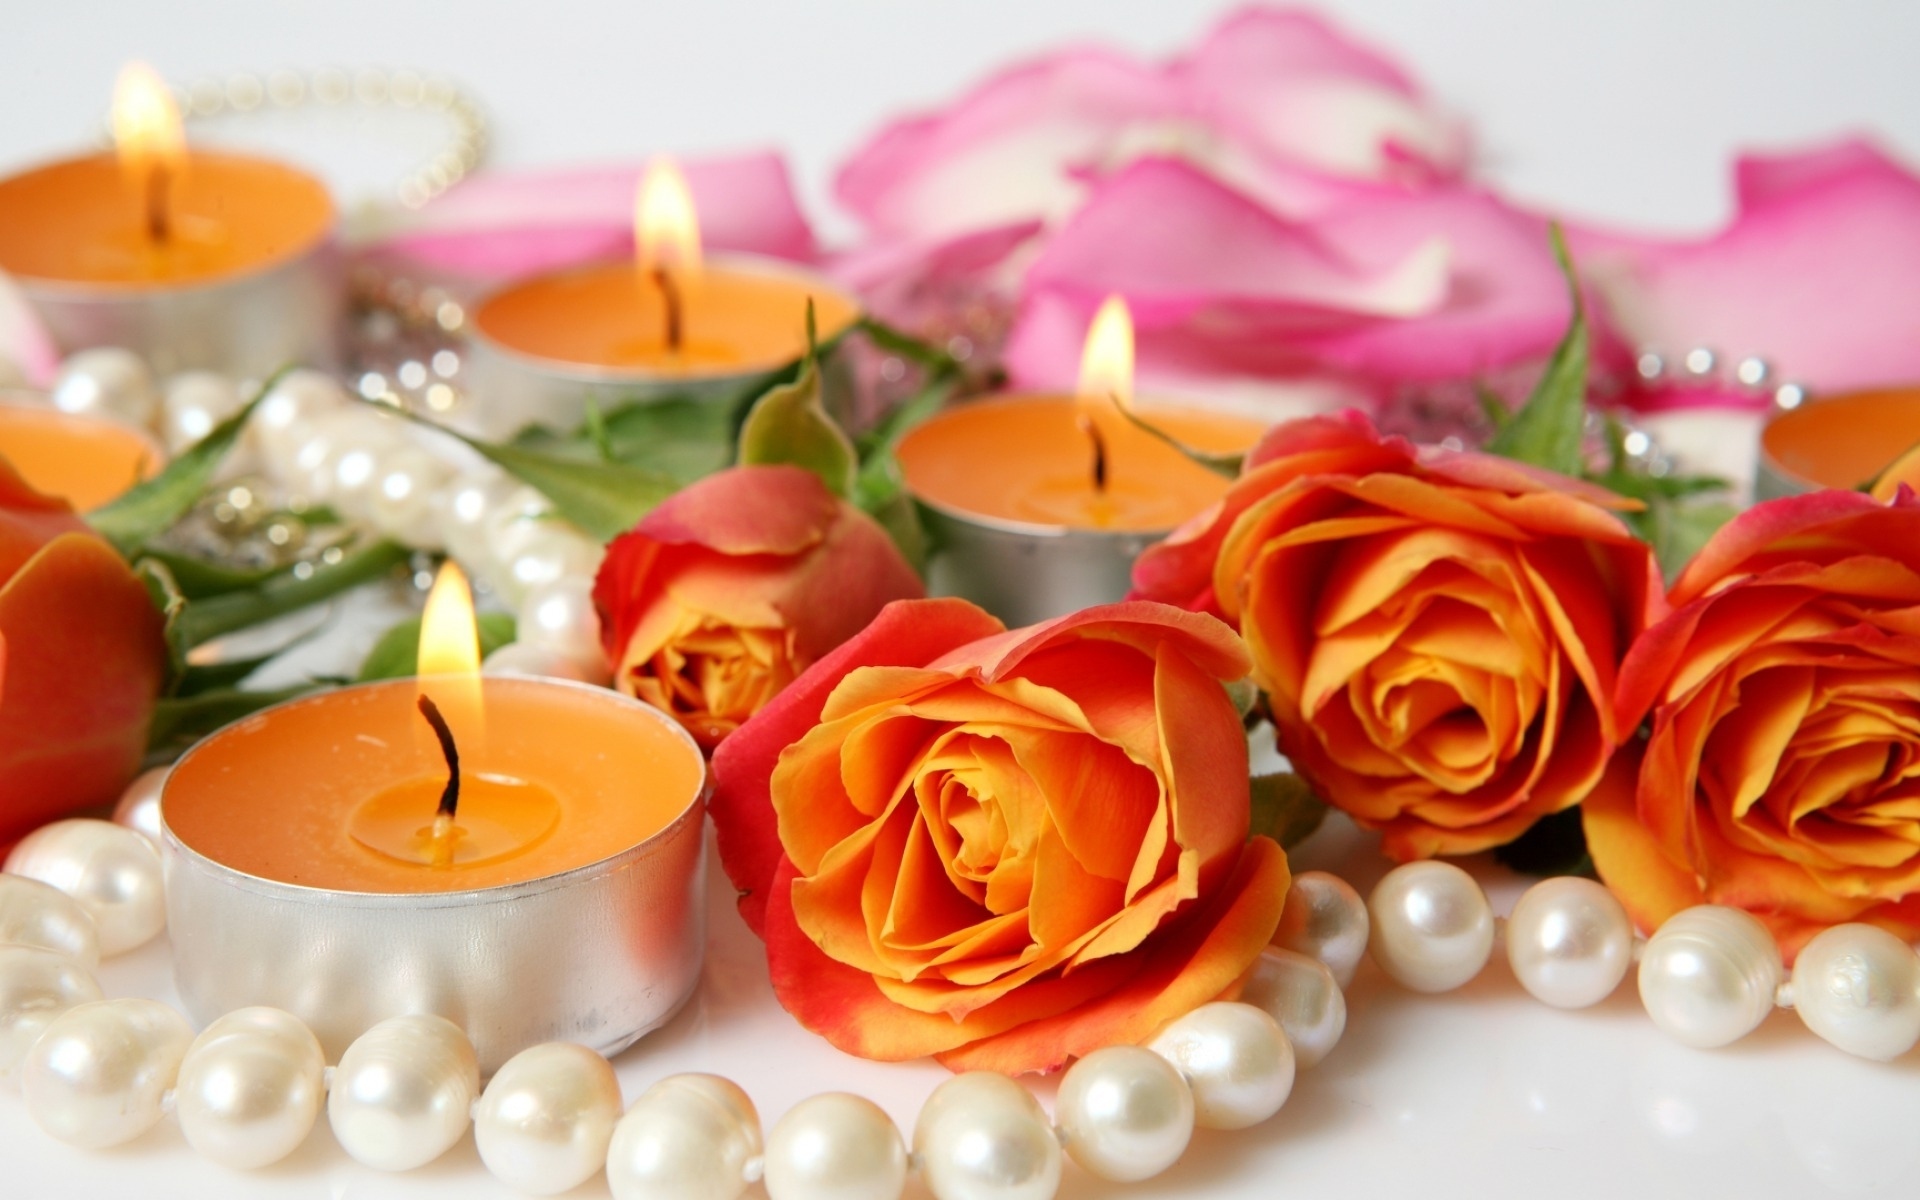 General 1920x1200 jewelry pearls rose candles closeup